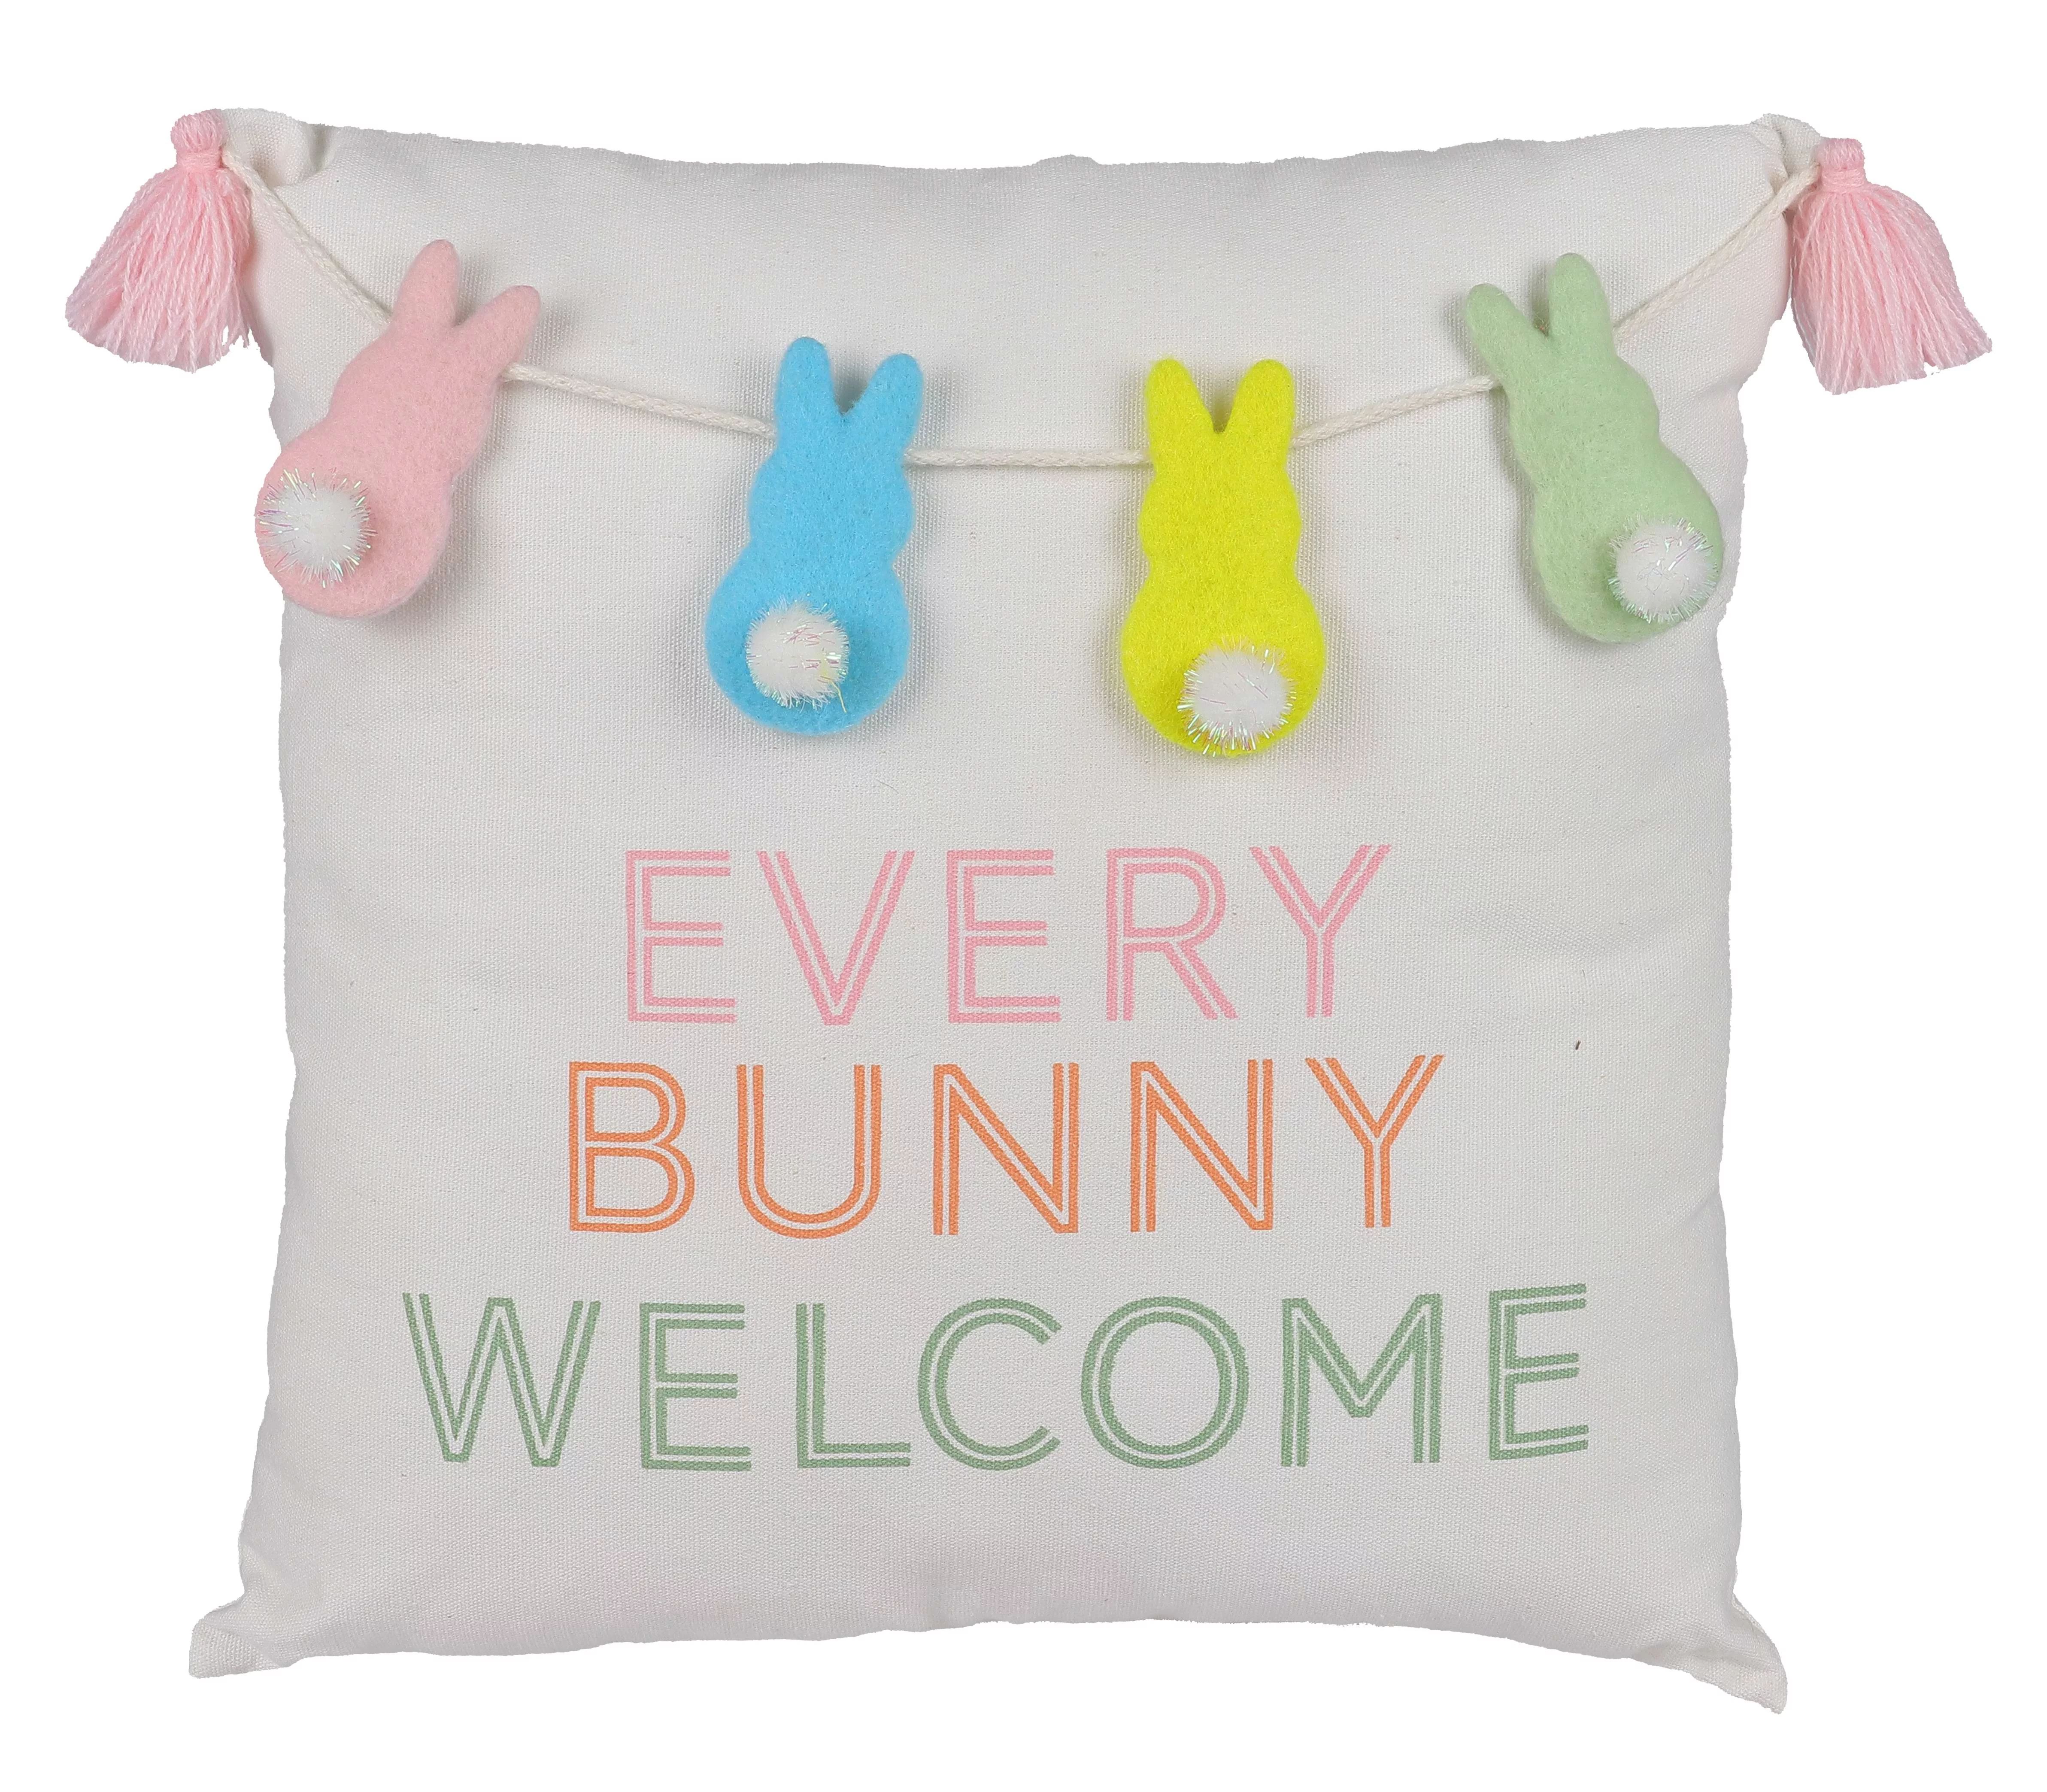 Way To Celebrate Easter Every Bunny Welcome Pillow | Walmart (US)